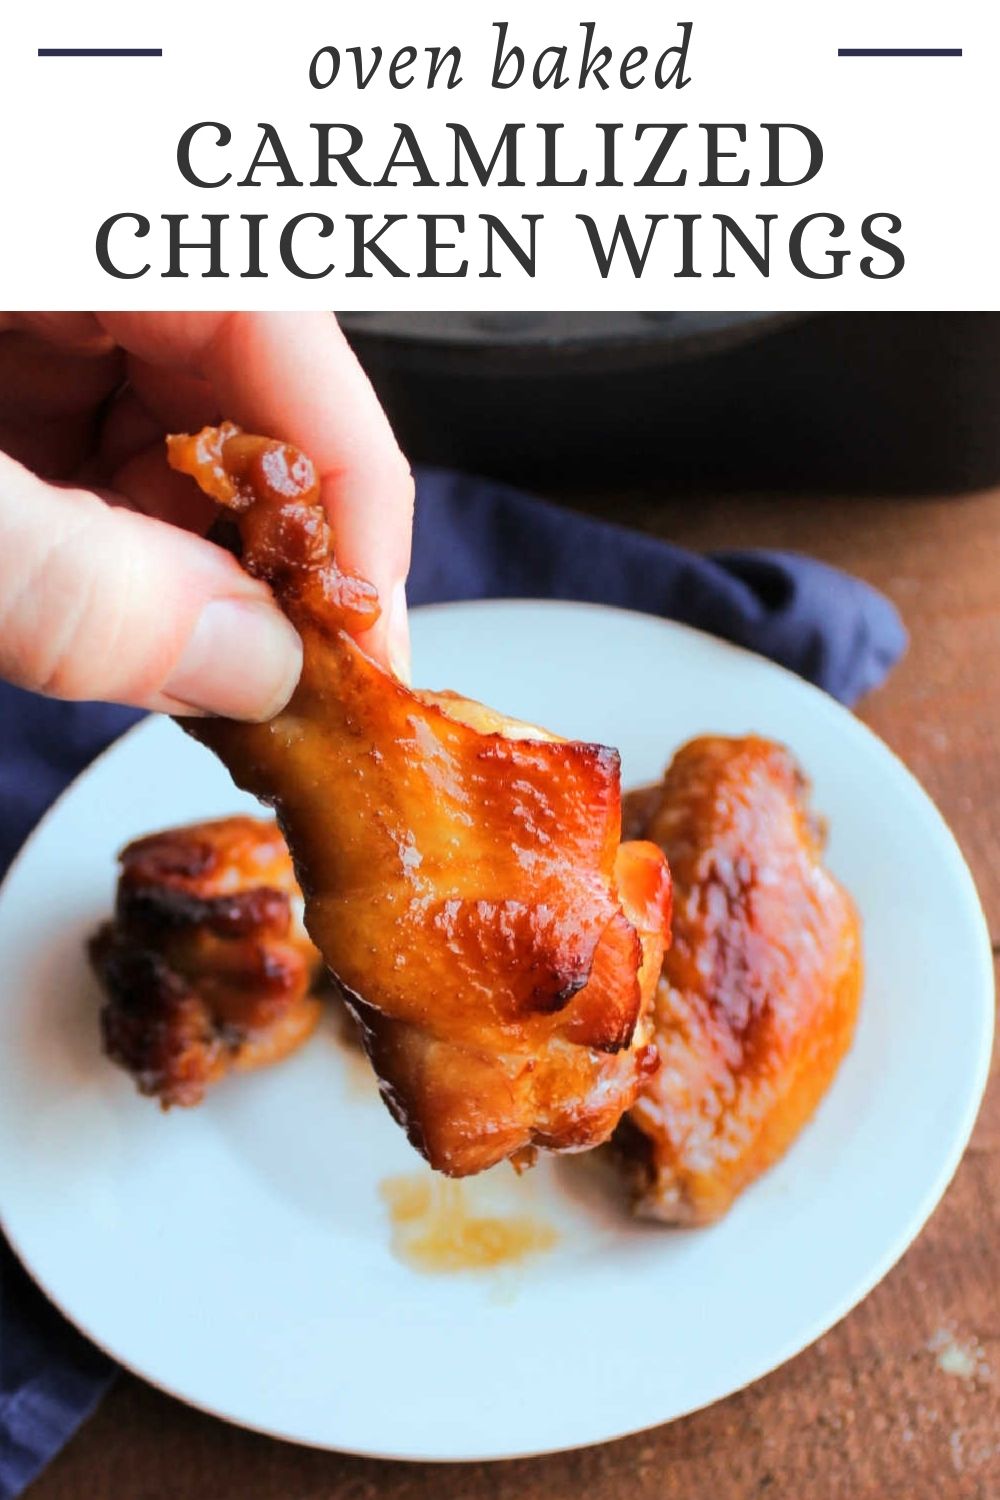 June's caramelized baked chicken wings are marinated and cooked in a flavorful sauce made of brown sugar, soy sauce and butter. They are tender, succulent and easy to make.